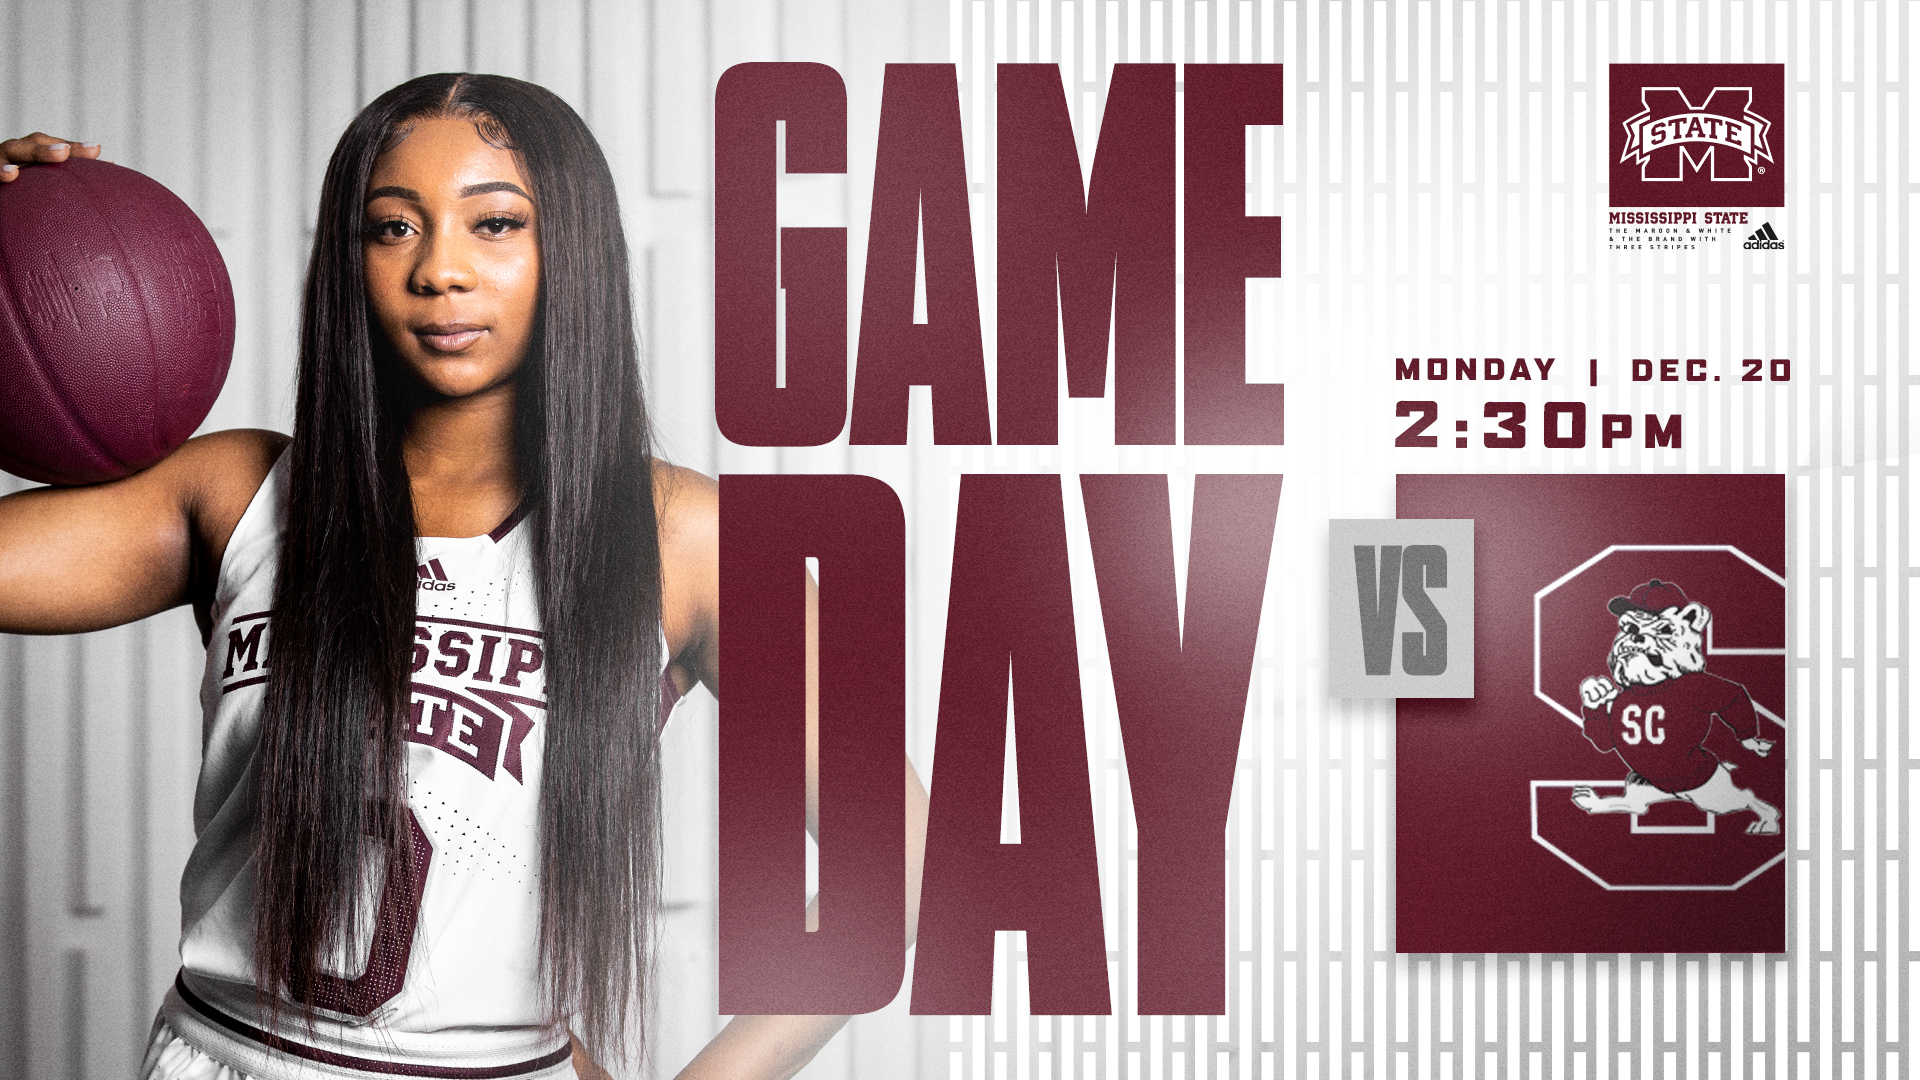 Maroon and white game day graphic with image of MSU women's basketball player Anastasia Hayes